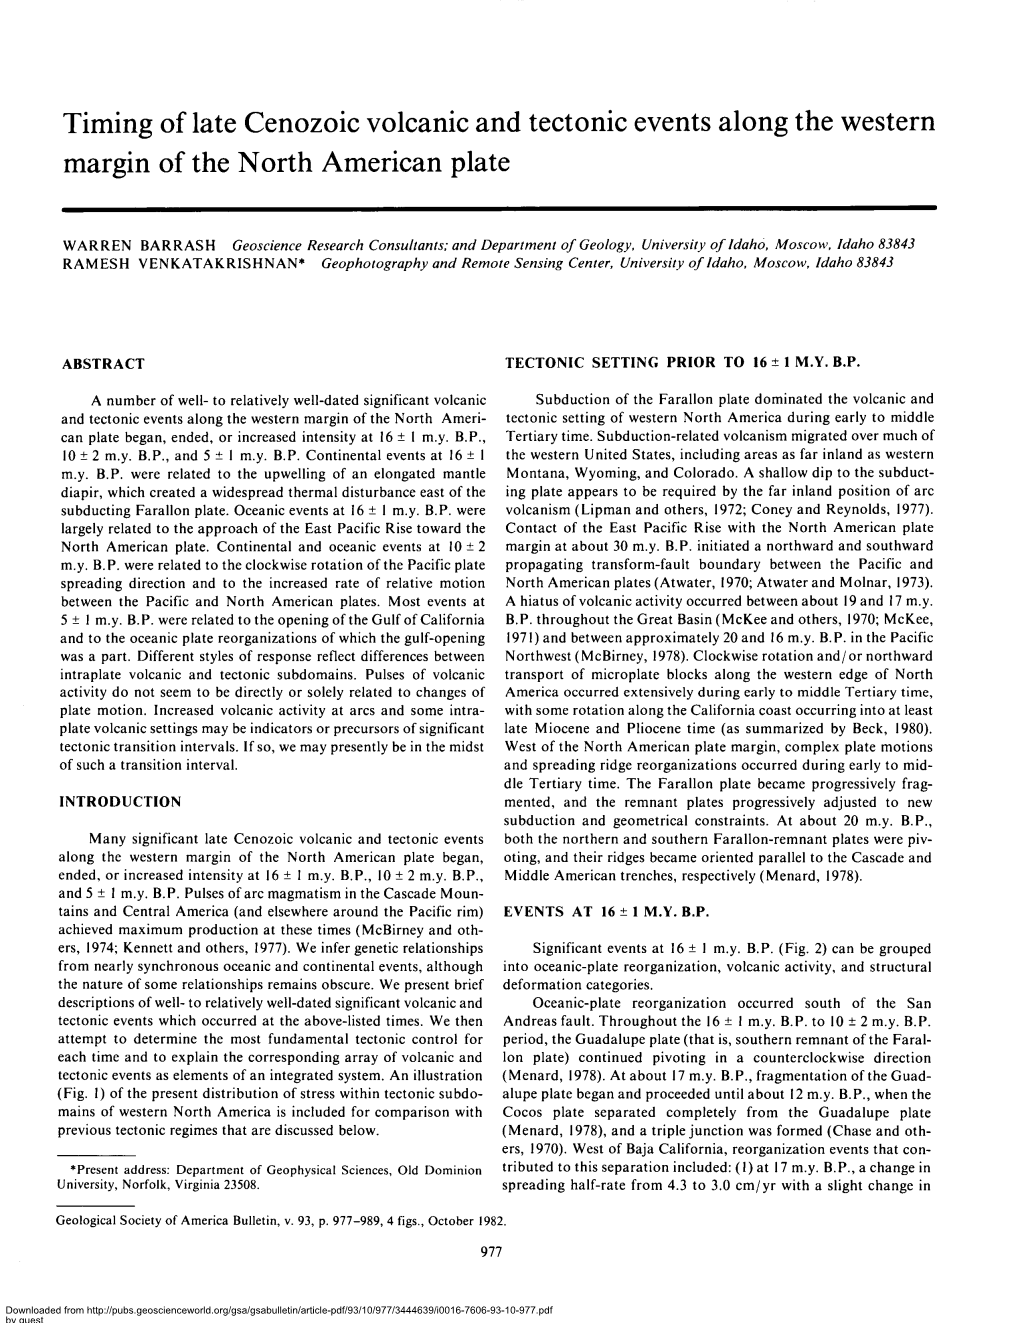 Timing of Late Cenozoic Volcanic and Tectonic Events Along the Western Margin of the North American Plate